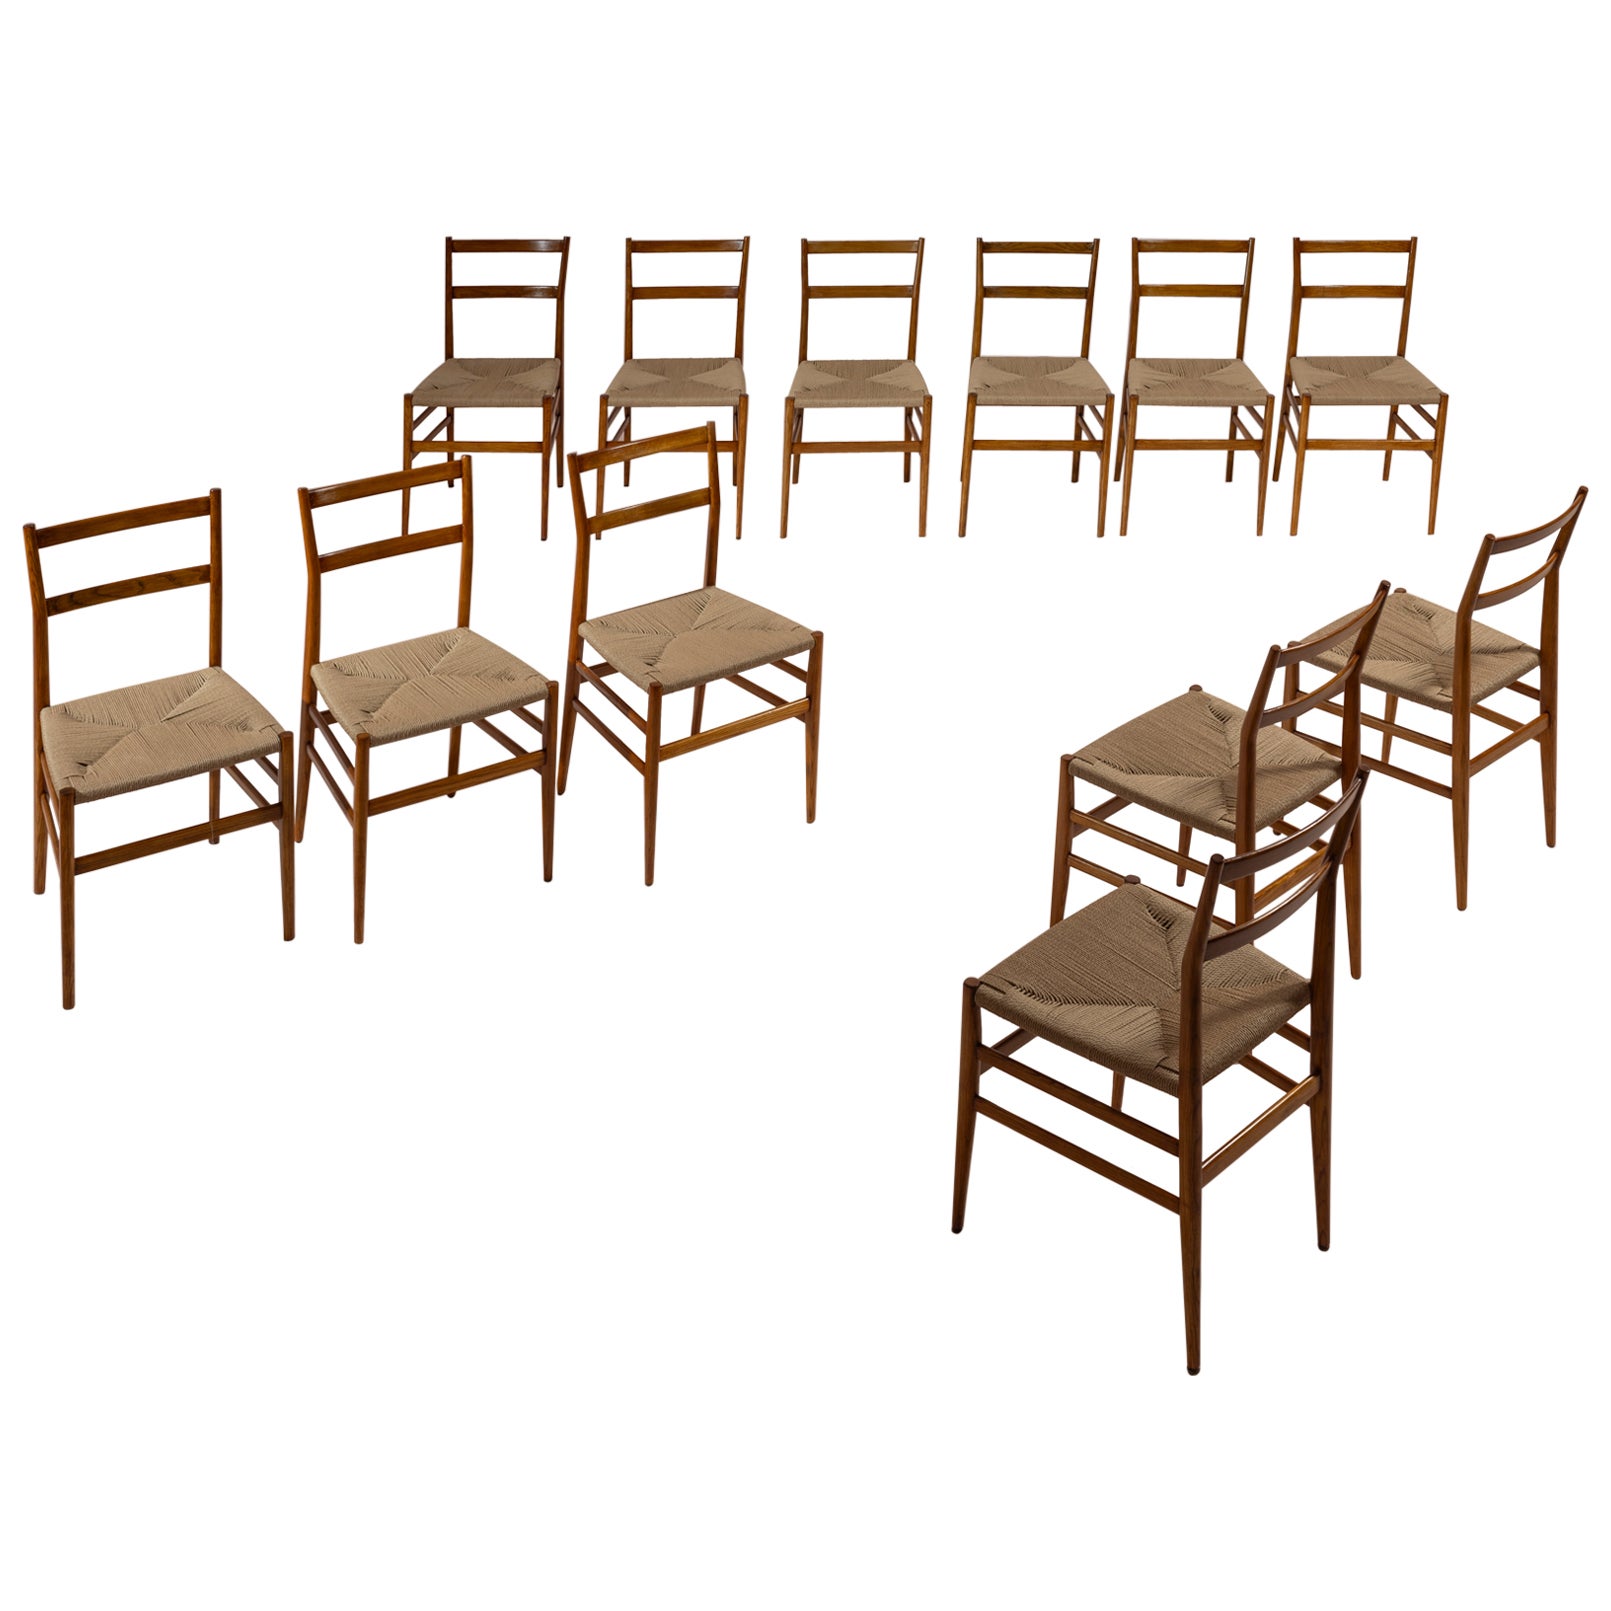 Gio Ponti set of twelve Leggera chairs with rope seat, Cassina, Italy, 1951 For Sale